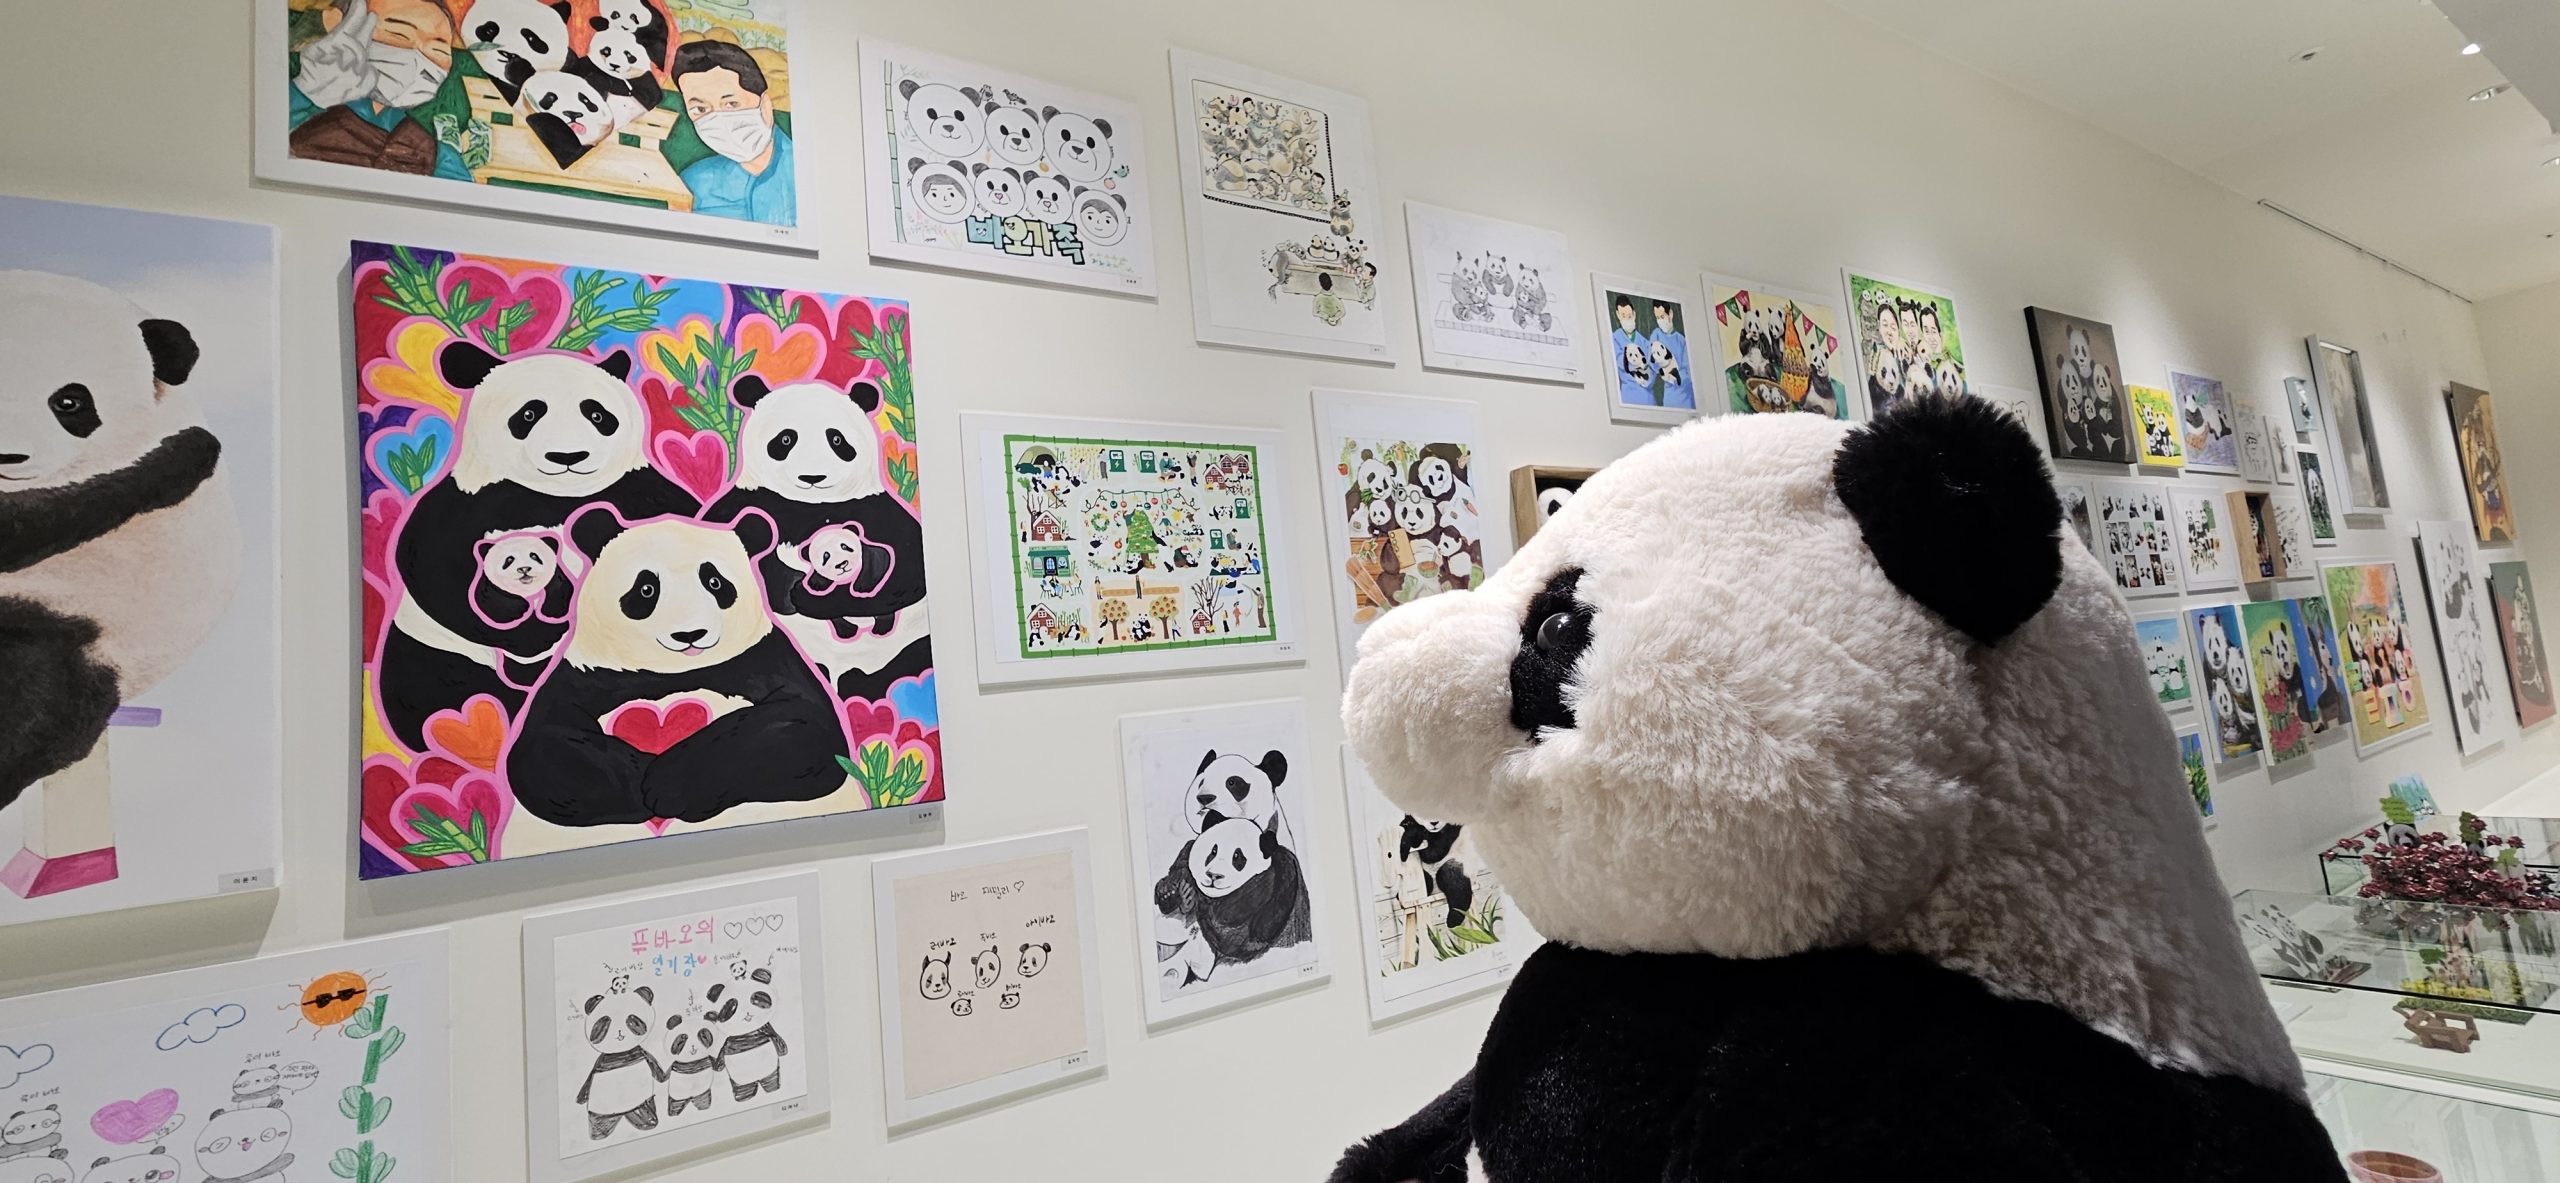 A Fu Bao plushy admires one of the pieces of fan art.